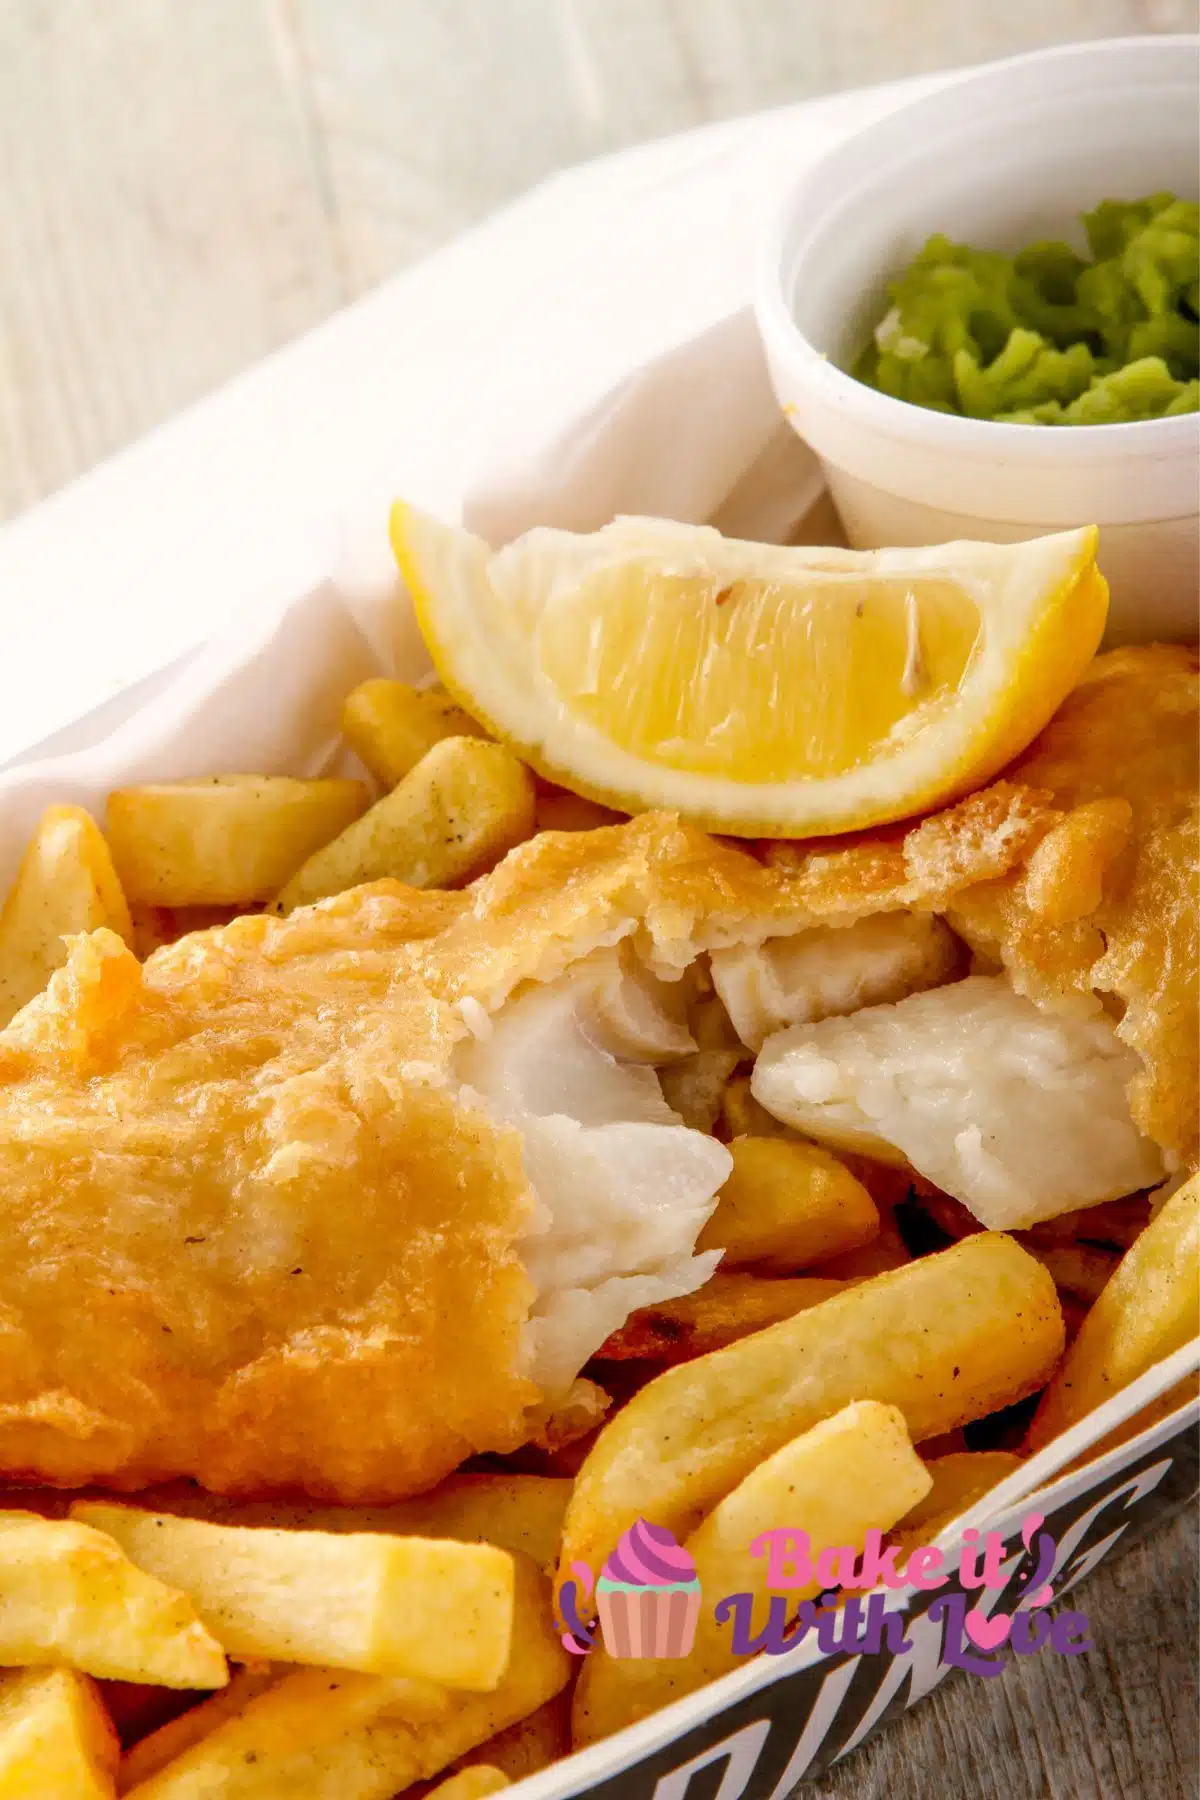 Tall image showing fish and chips.